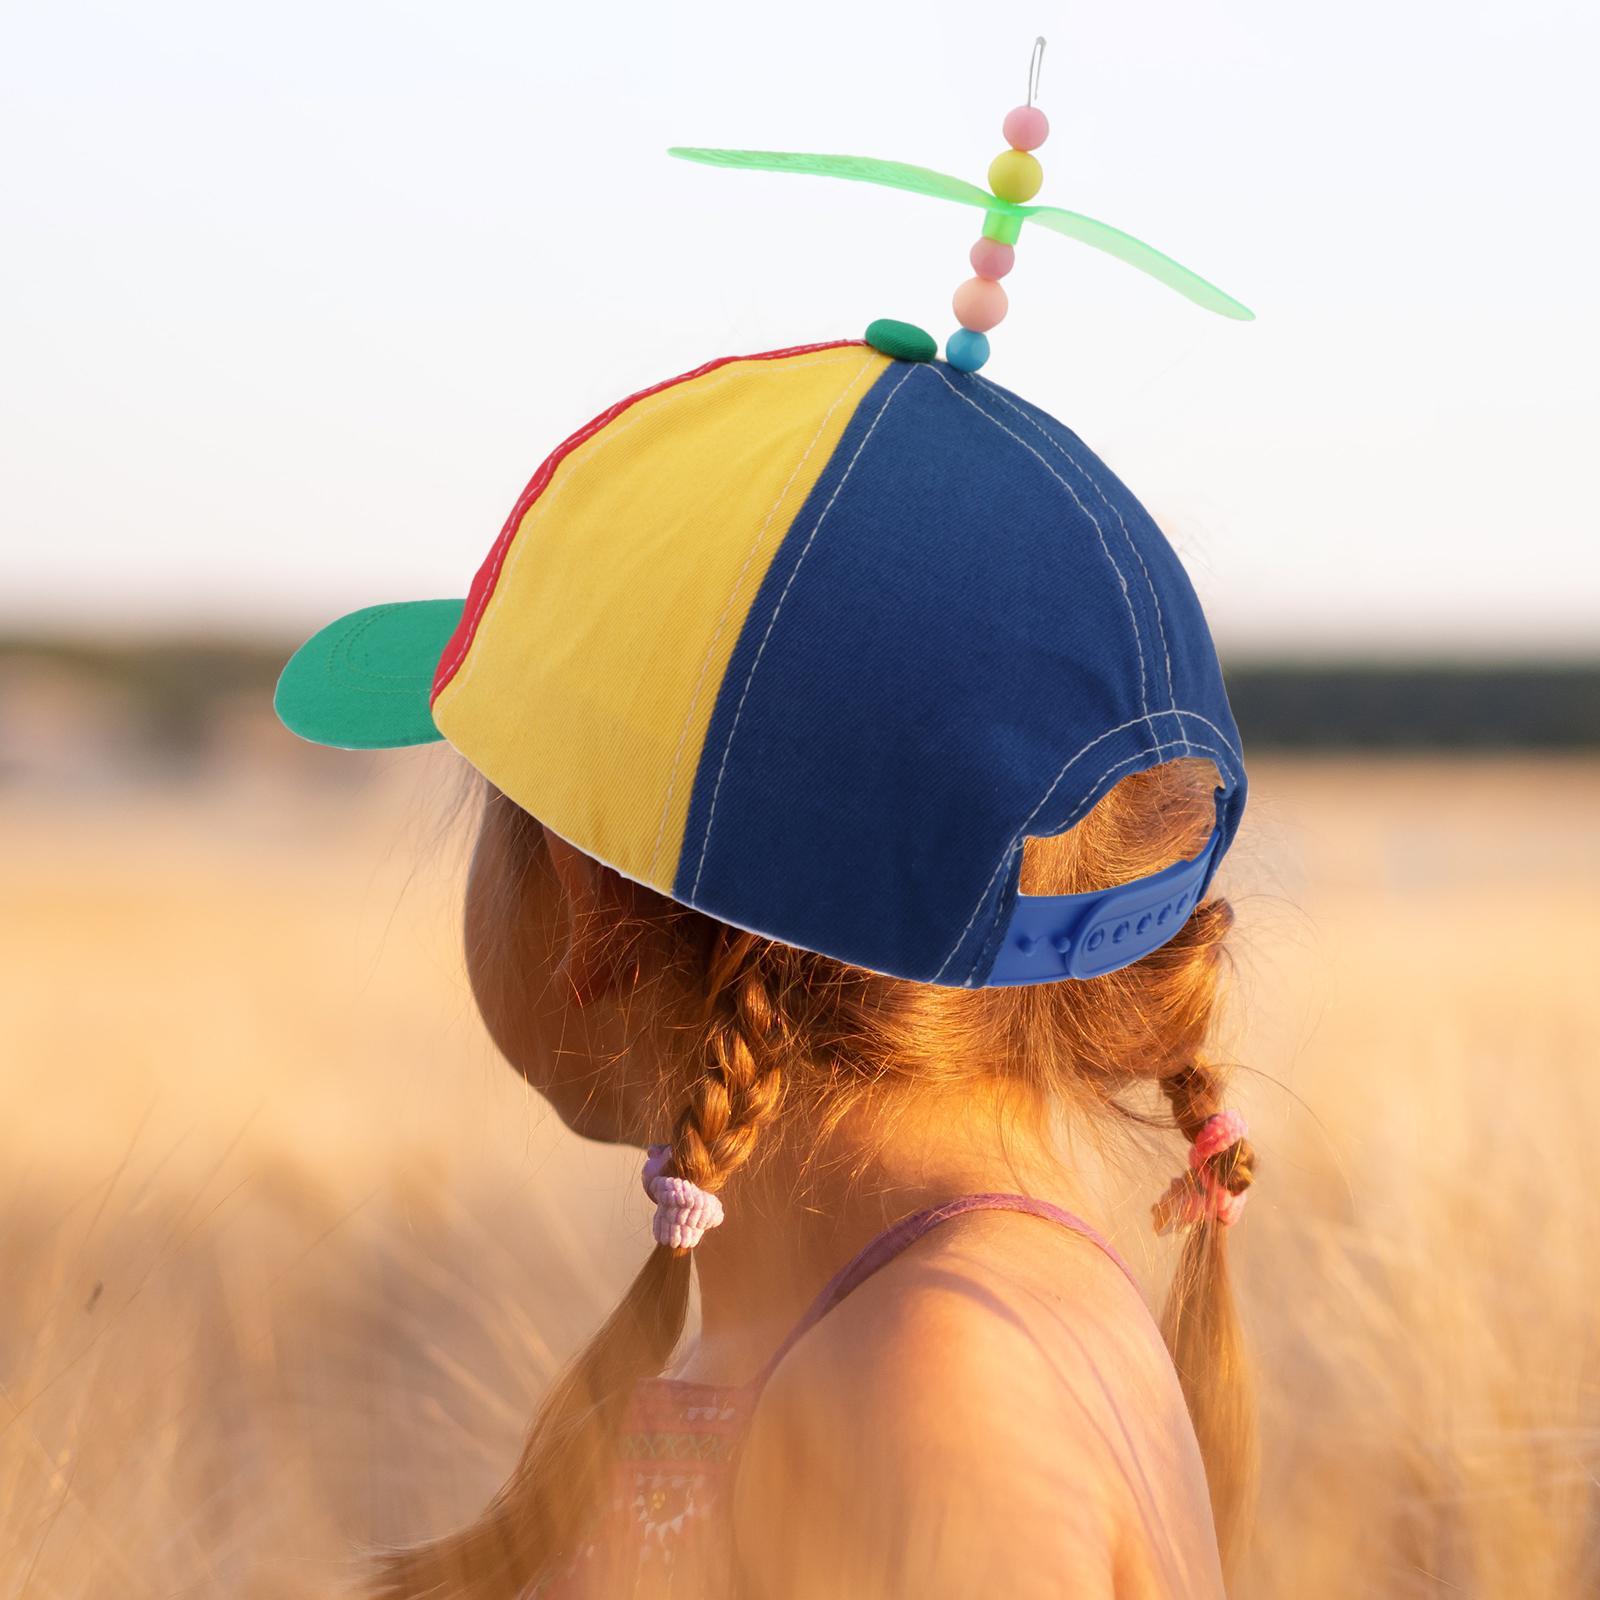 Rainbow Propeller Spinner Hat with Adjustable Hat Snap Back - Costume Accs